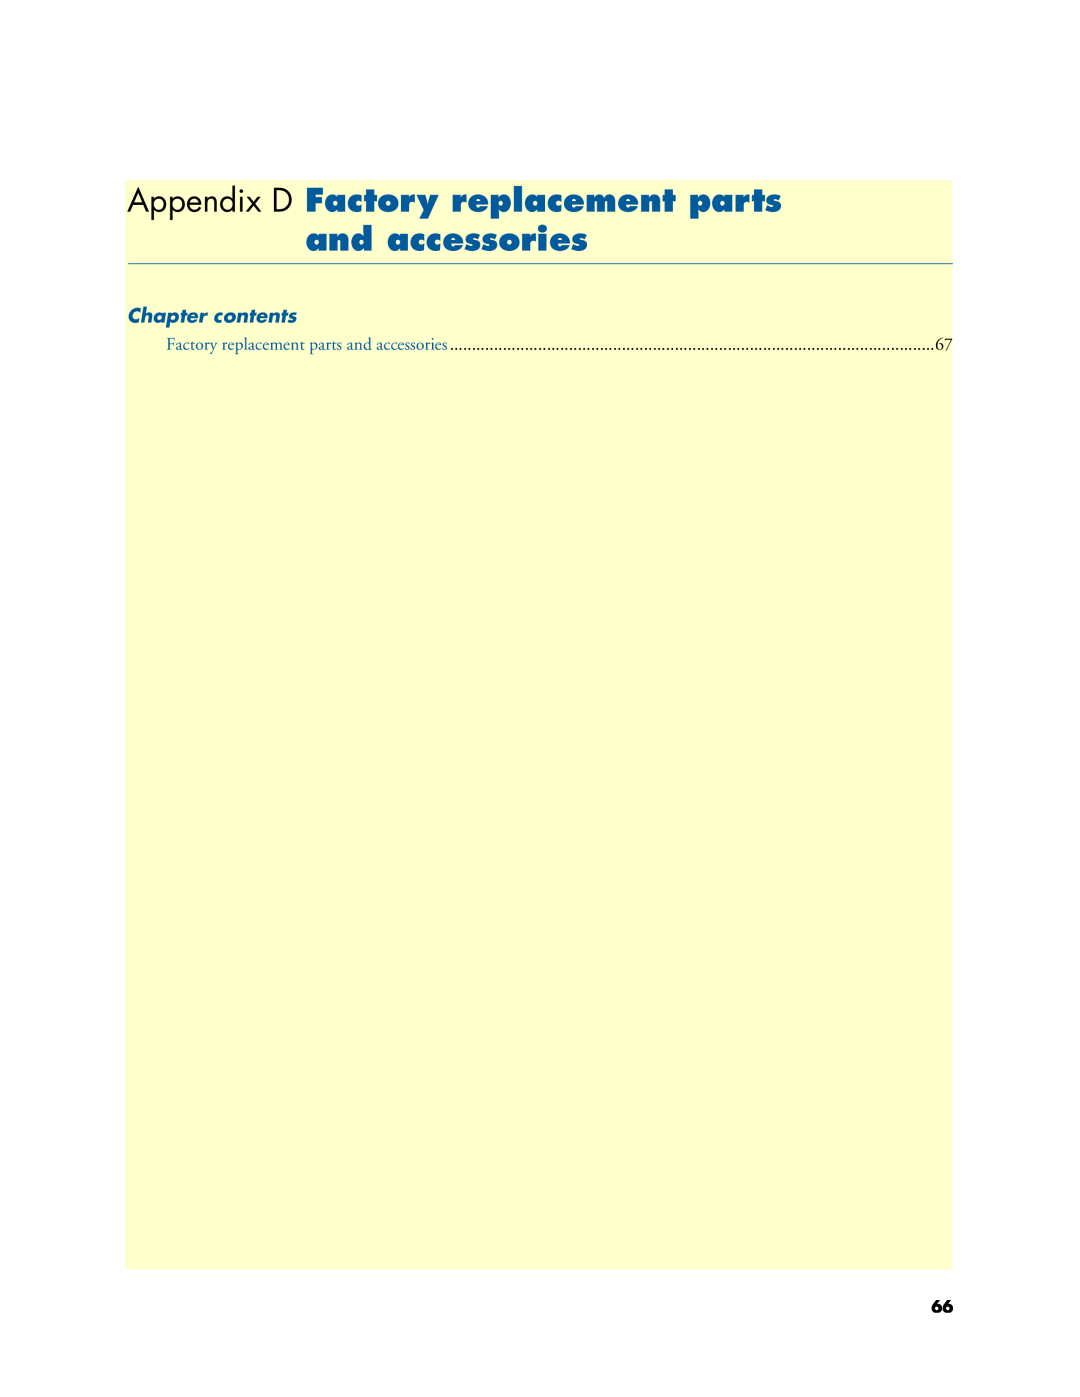 Patton electronic 3088A manual Appendix D Factory replacement parts and accessories, Chapter contents 